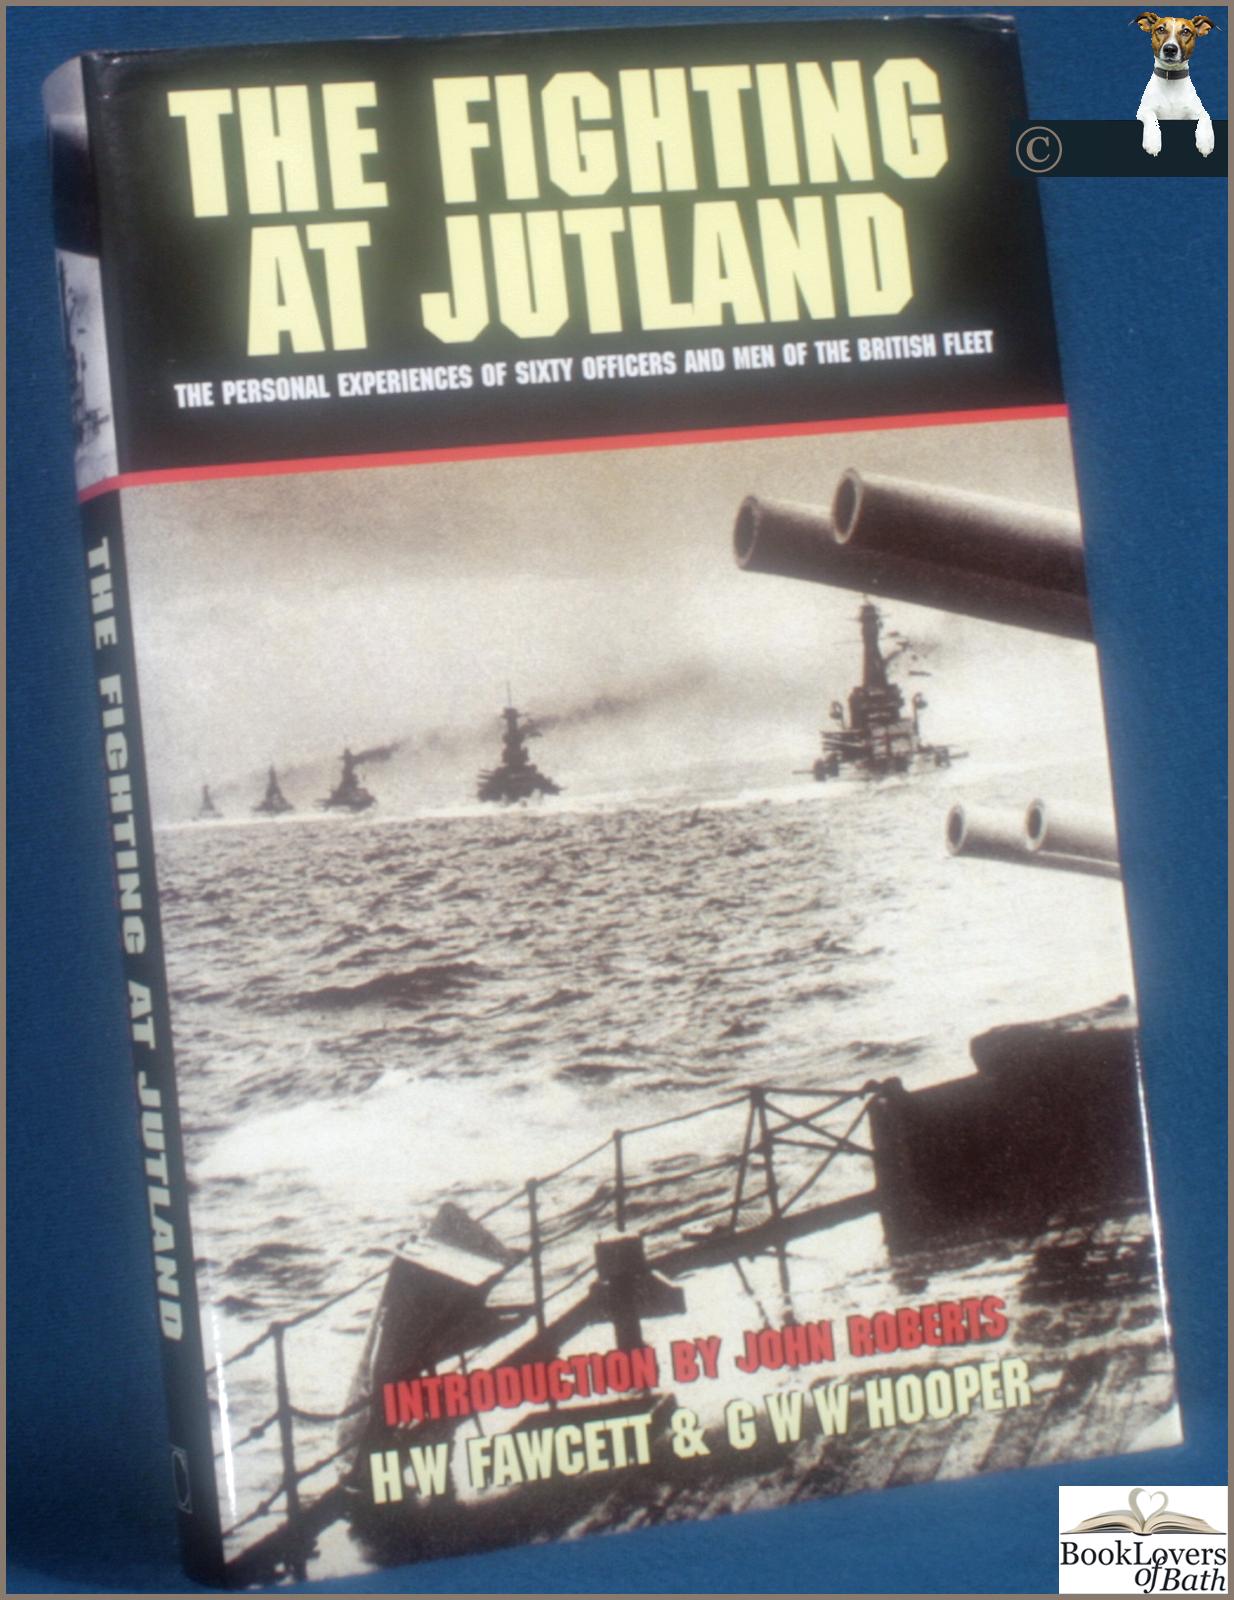 The Fighting at Jutland: The Personal Experiences of Sixty Officers and Men of the British Fleet - Edited by H. W. Fawcett & G. W. W. Hooper